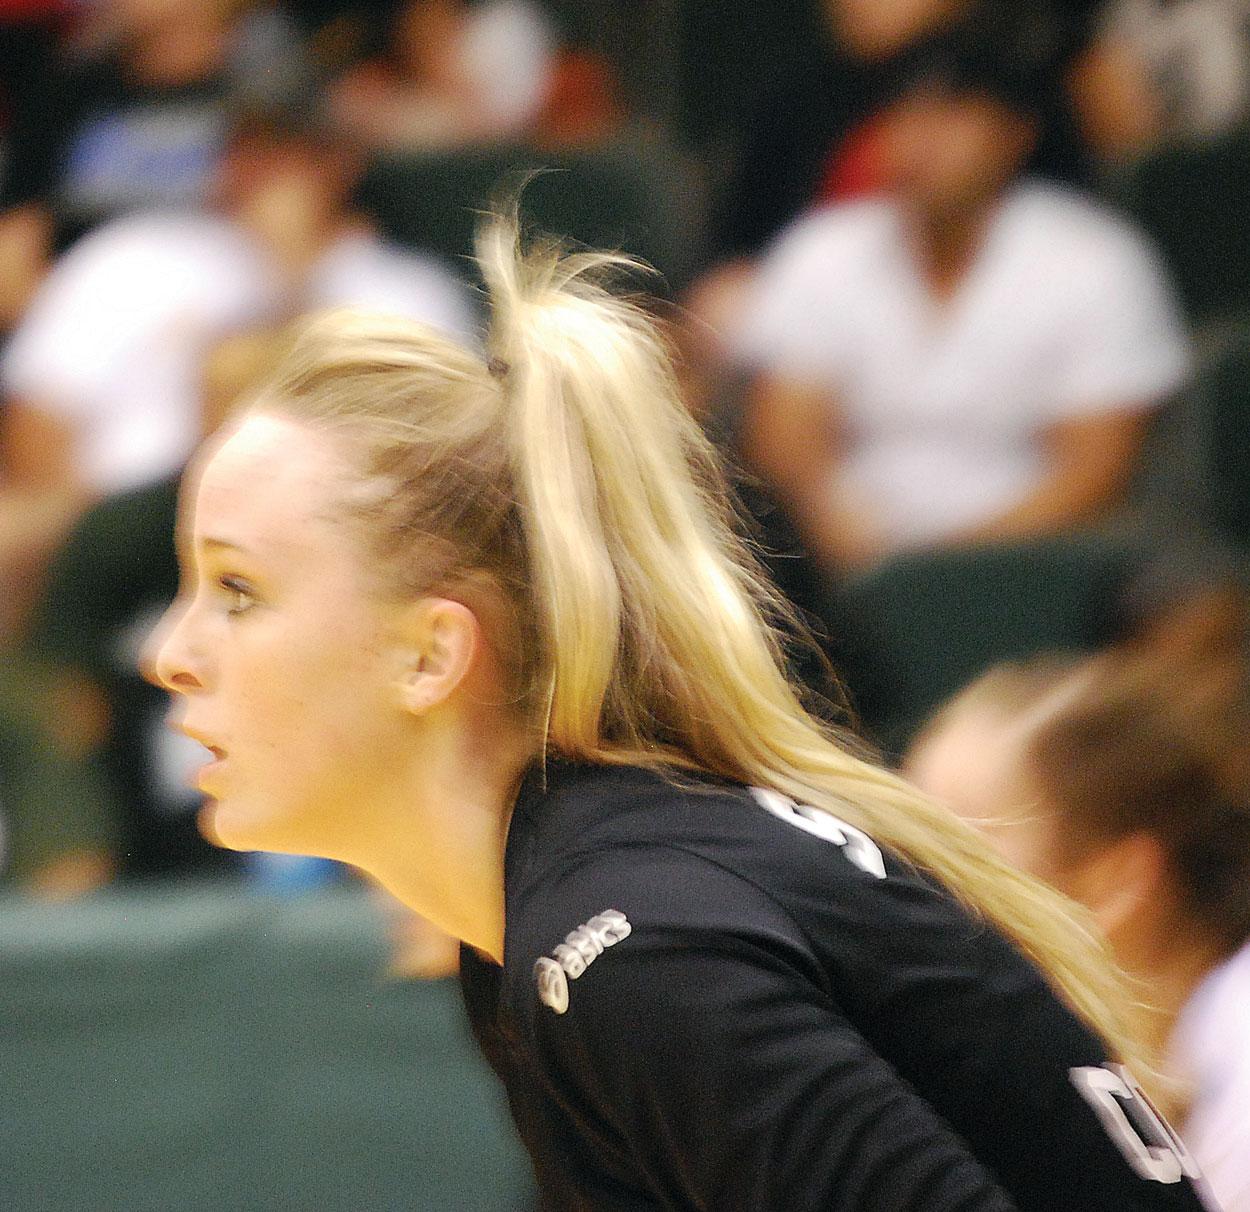 Seward volleyball player excels on and off court